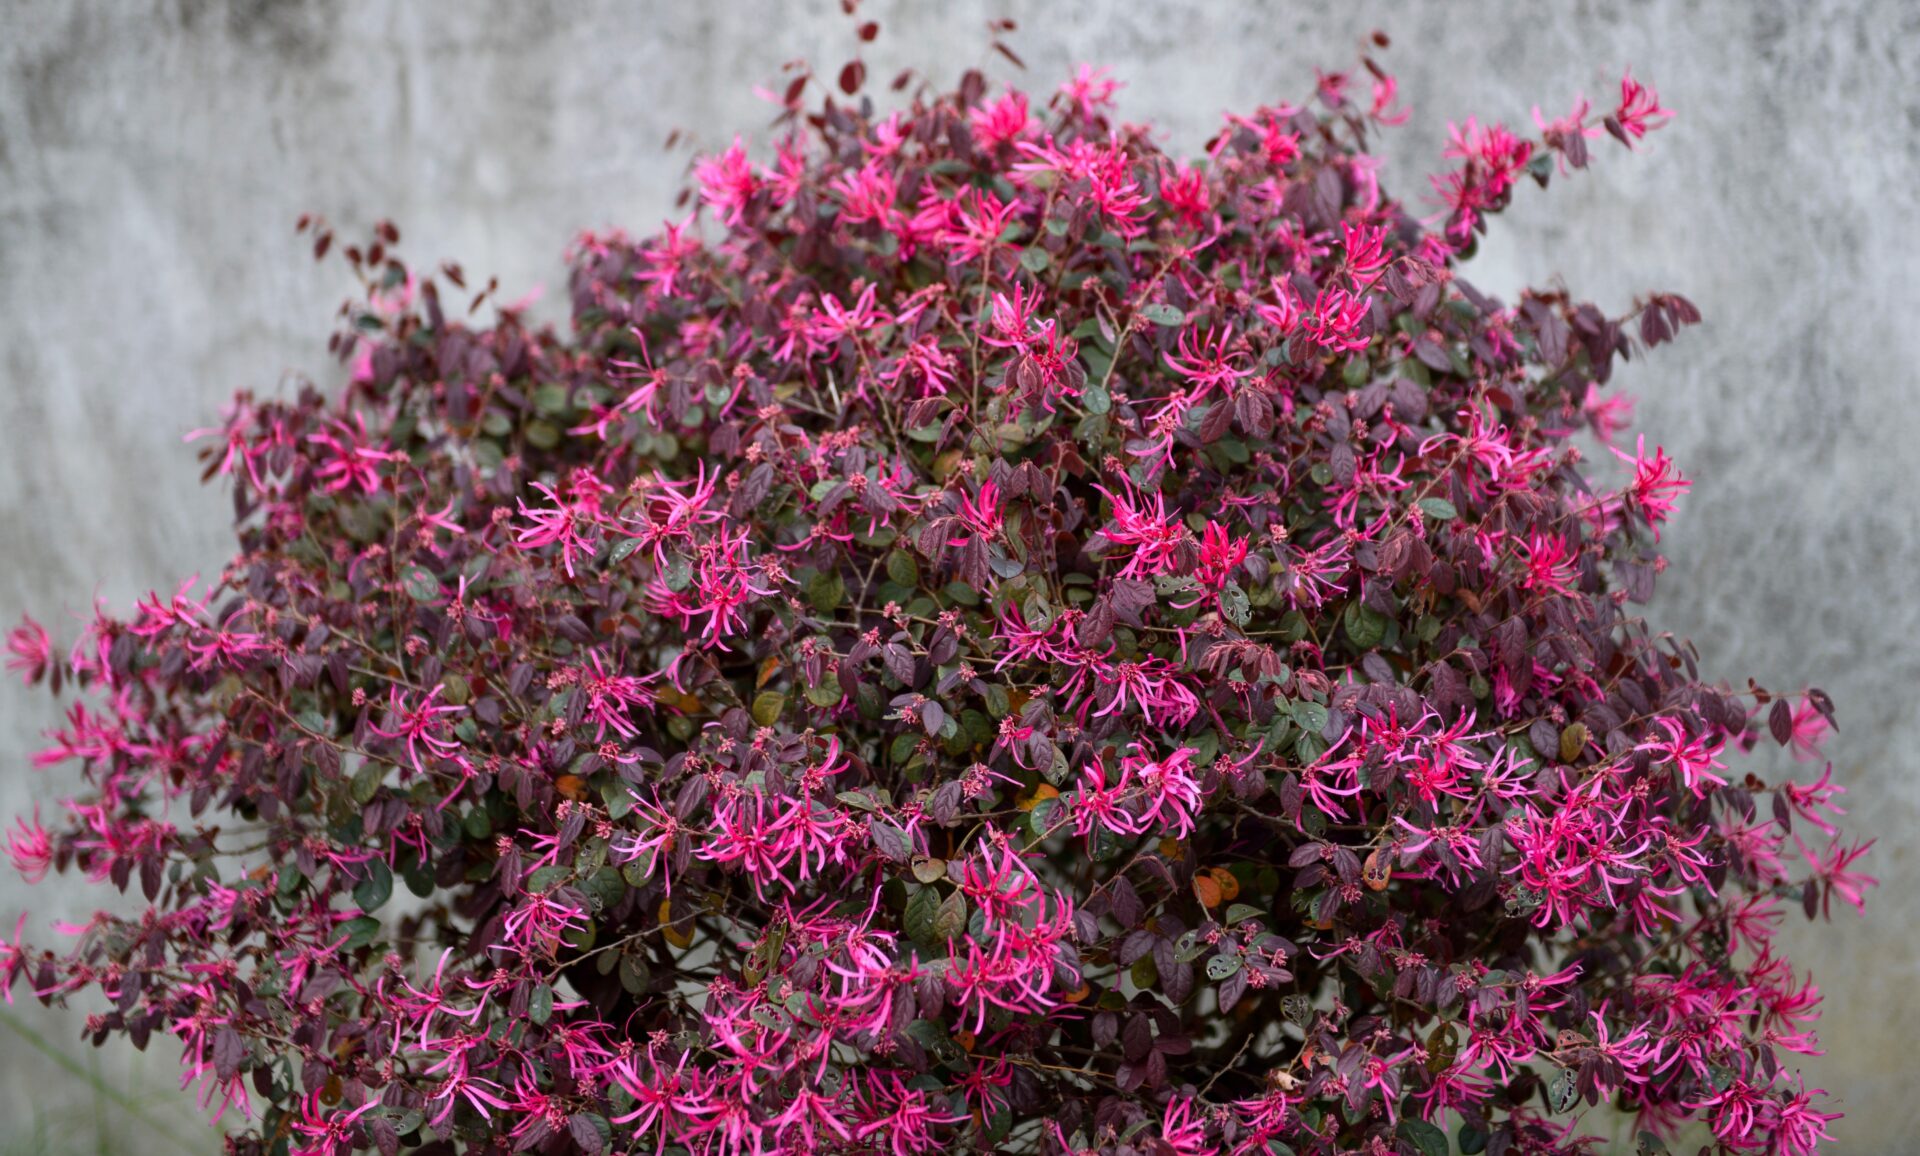 A bush with small purple leaves and bright pink flowers grows densely against a concrete wall, showcasing why it's considered one of the top indoor plants. Loropetalum Plum Gorgeous